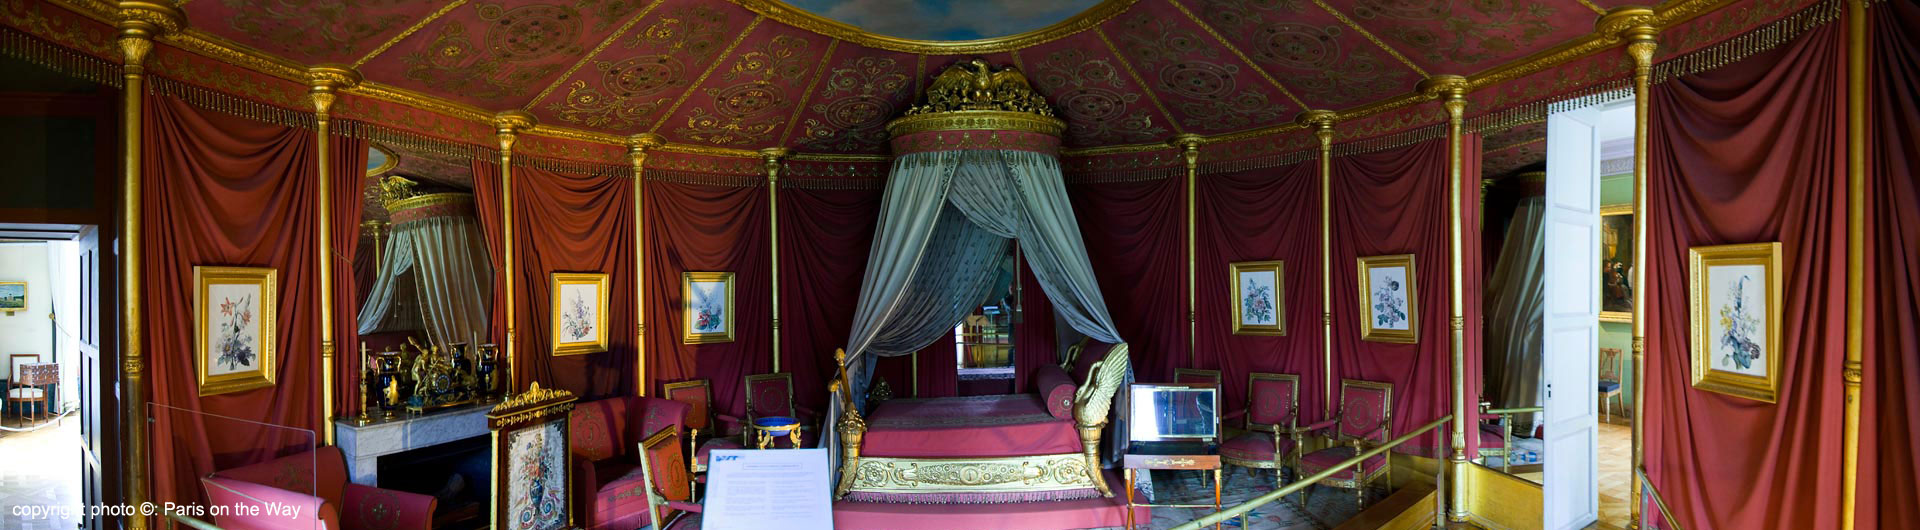 THE EMPRESS’S BEDROOM CHAMBER